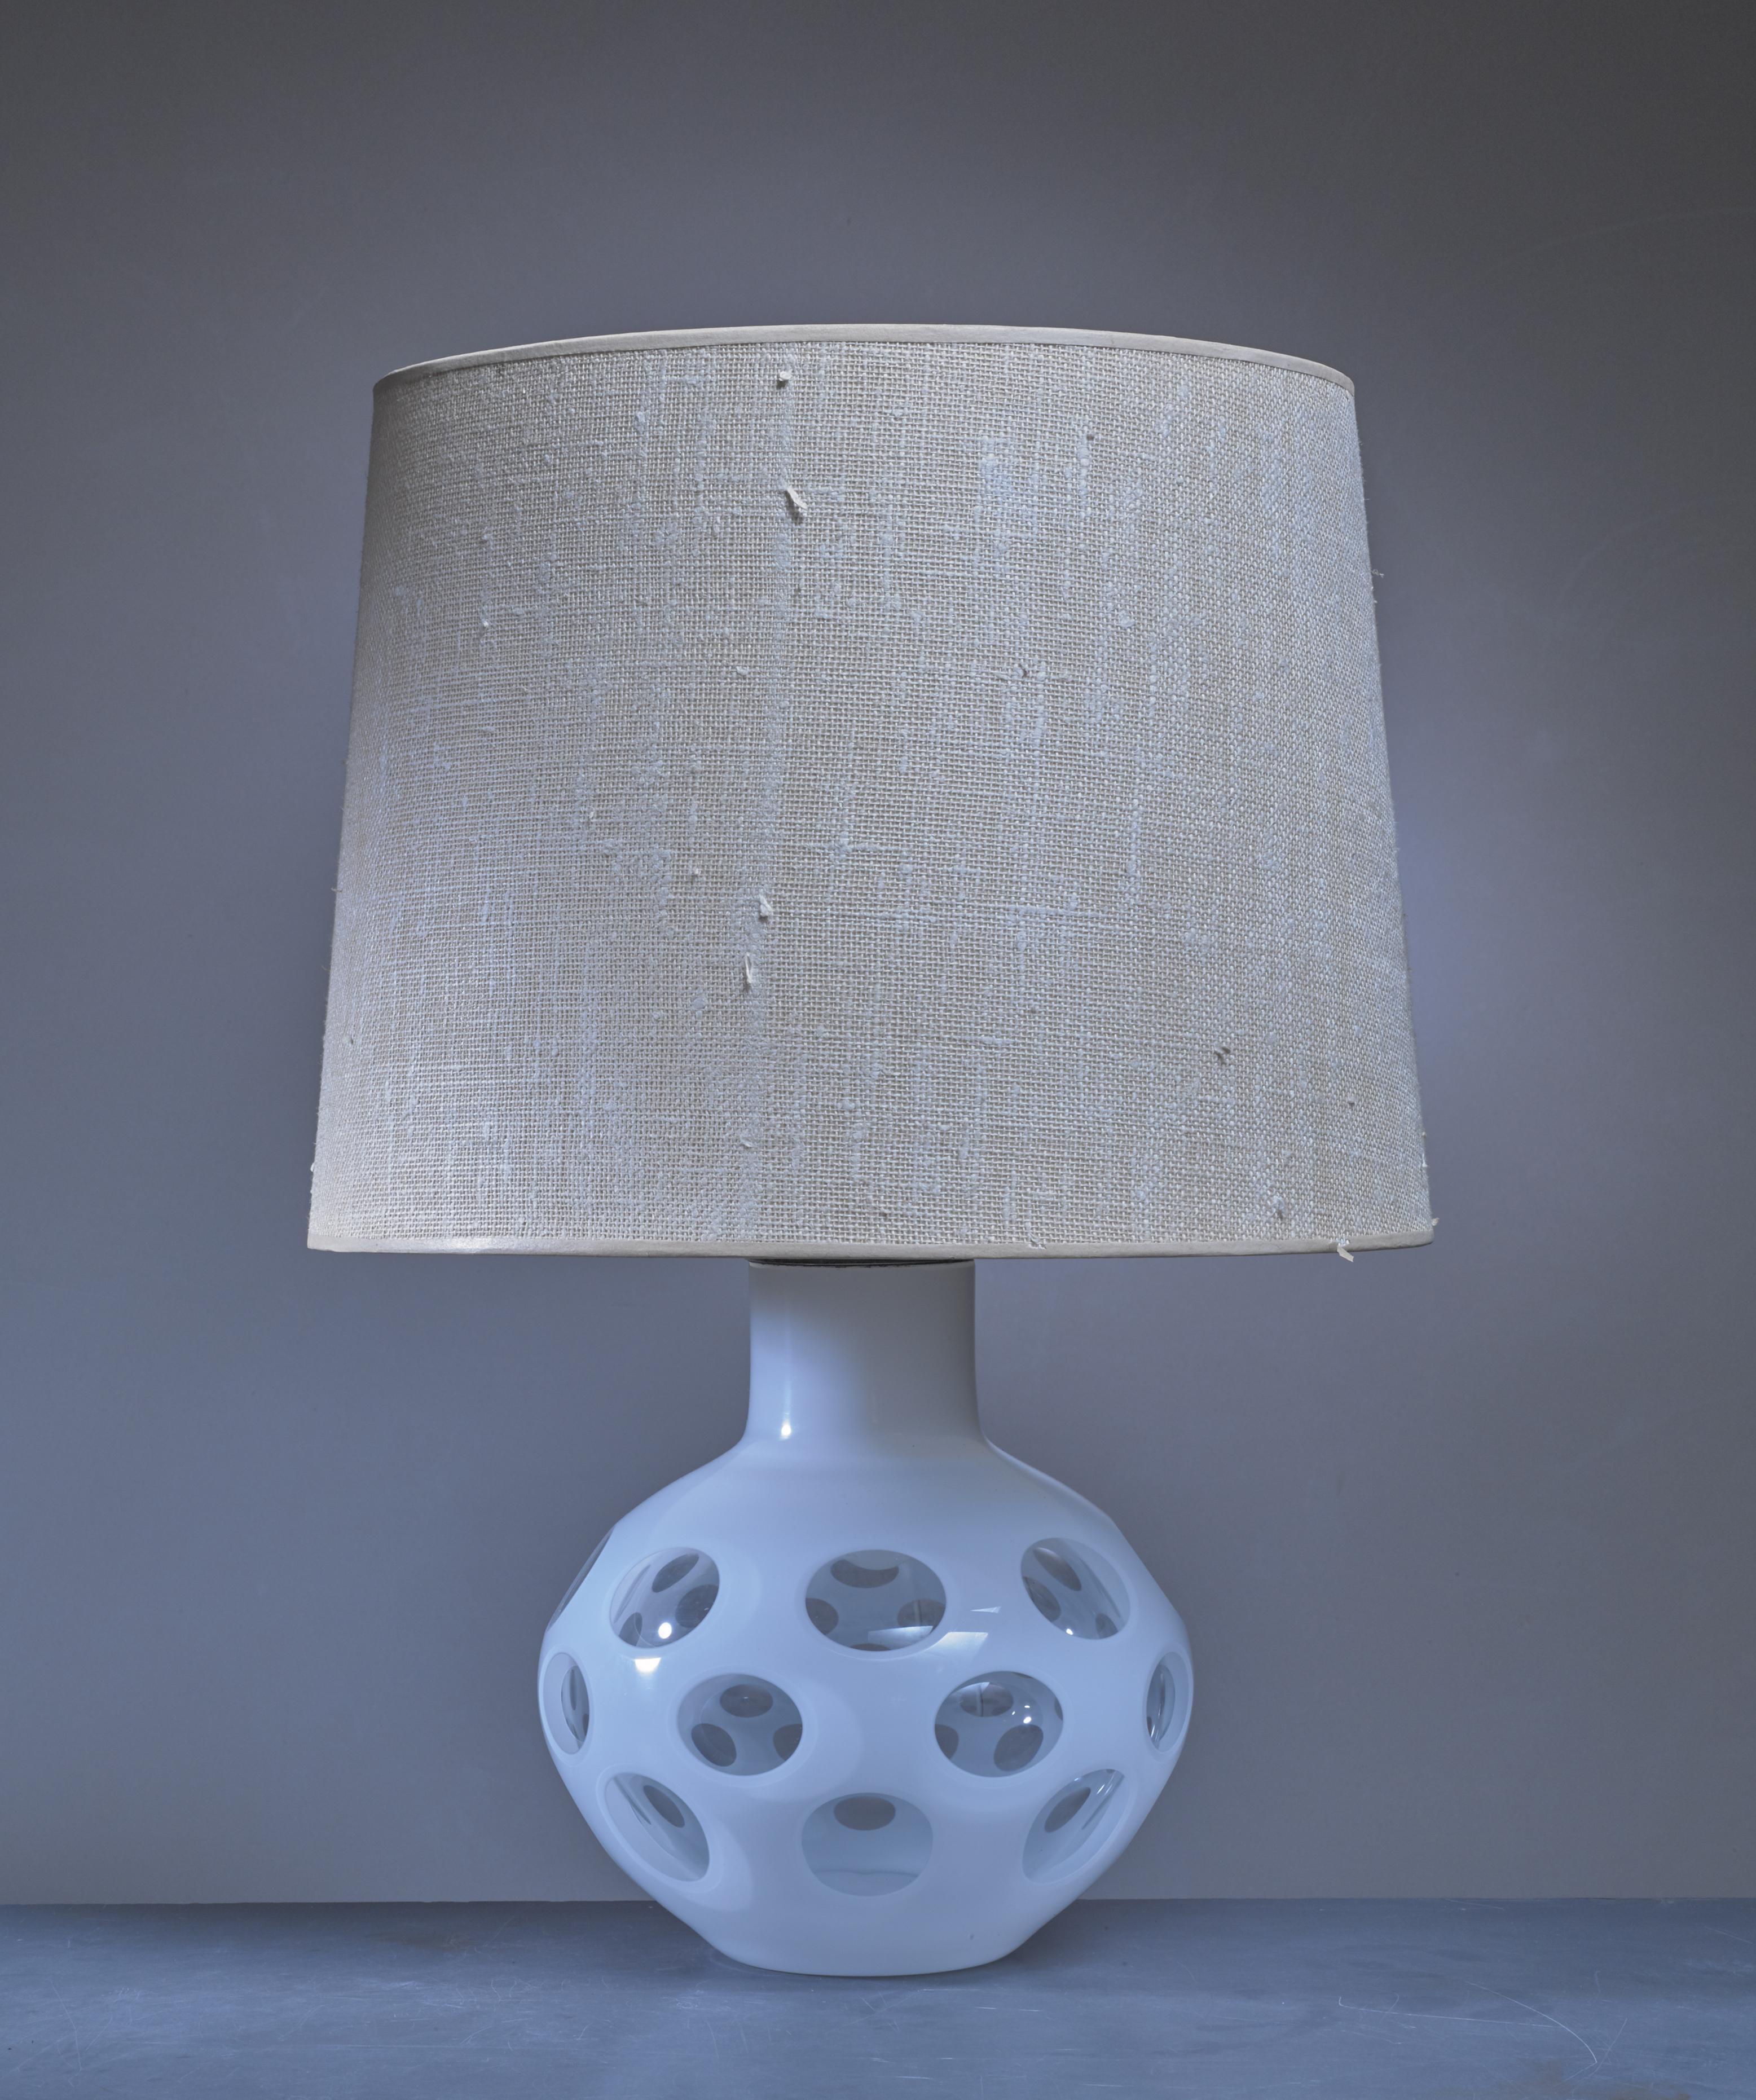 A table lamp by Carlo Nason for Mazzega. The lamp is made of a glass base, painted white with transparent parts, with a brass fitting on top. Inside the base is a small lamp.

The measurements and shipping costs stated are of the lamp without a